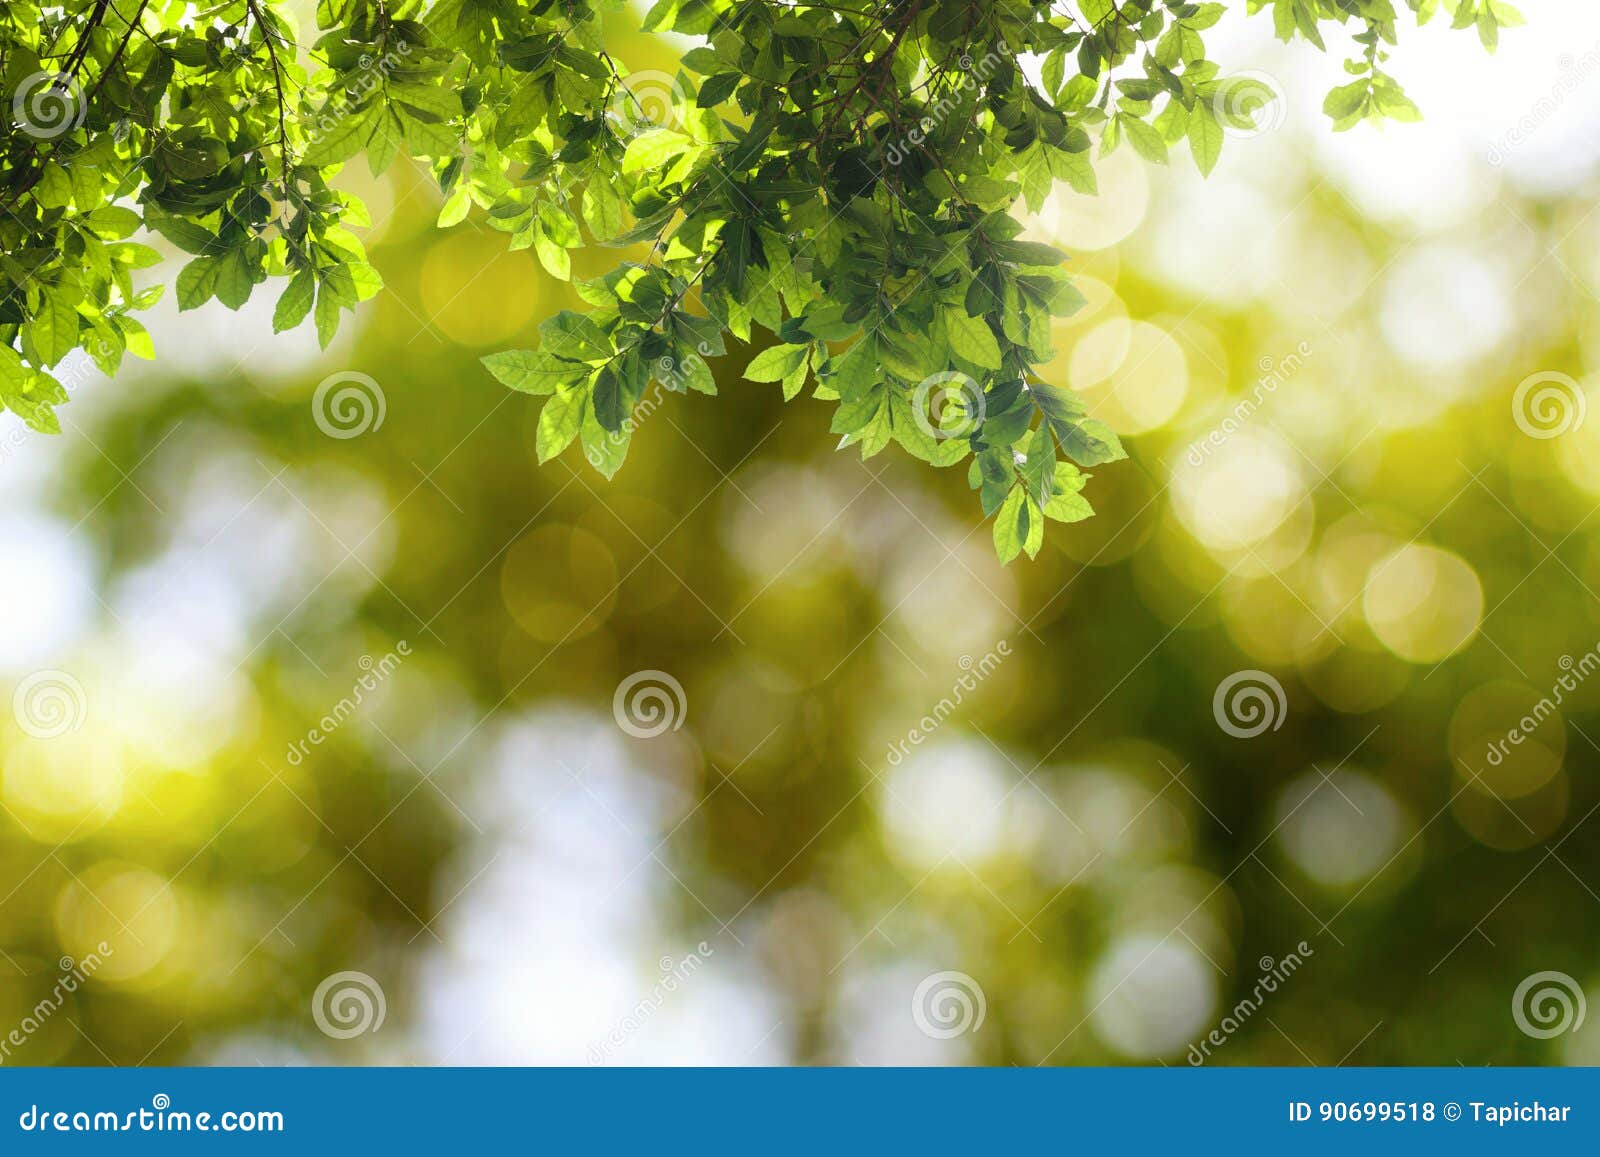 Green leaves hanging stock photo. Image of isolated, foliage - 90699518